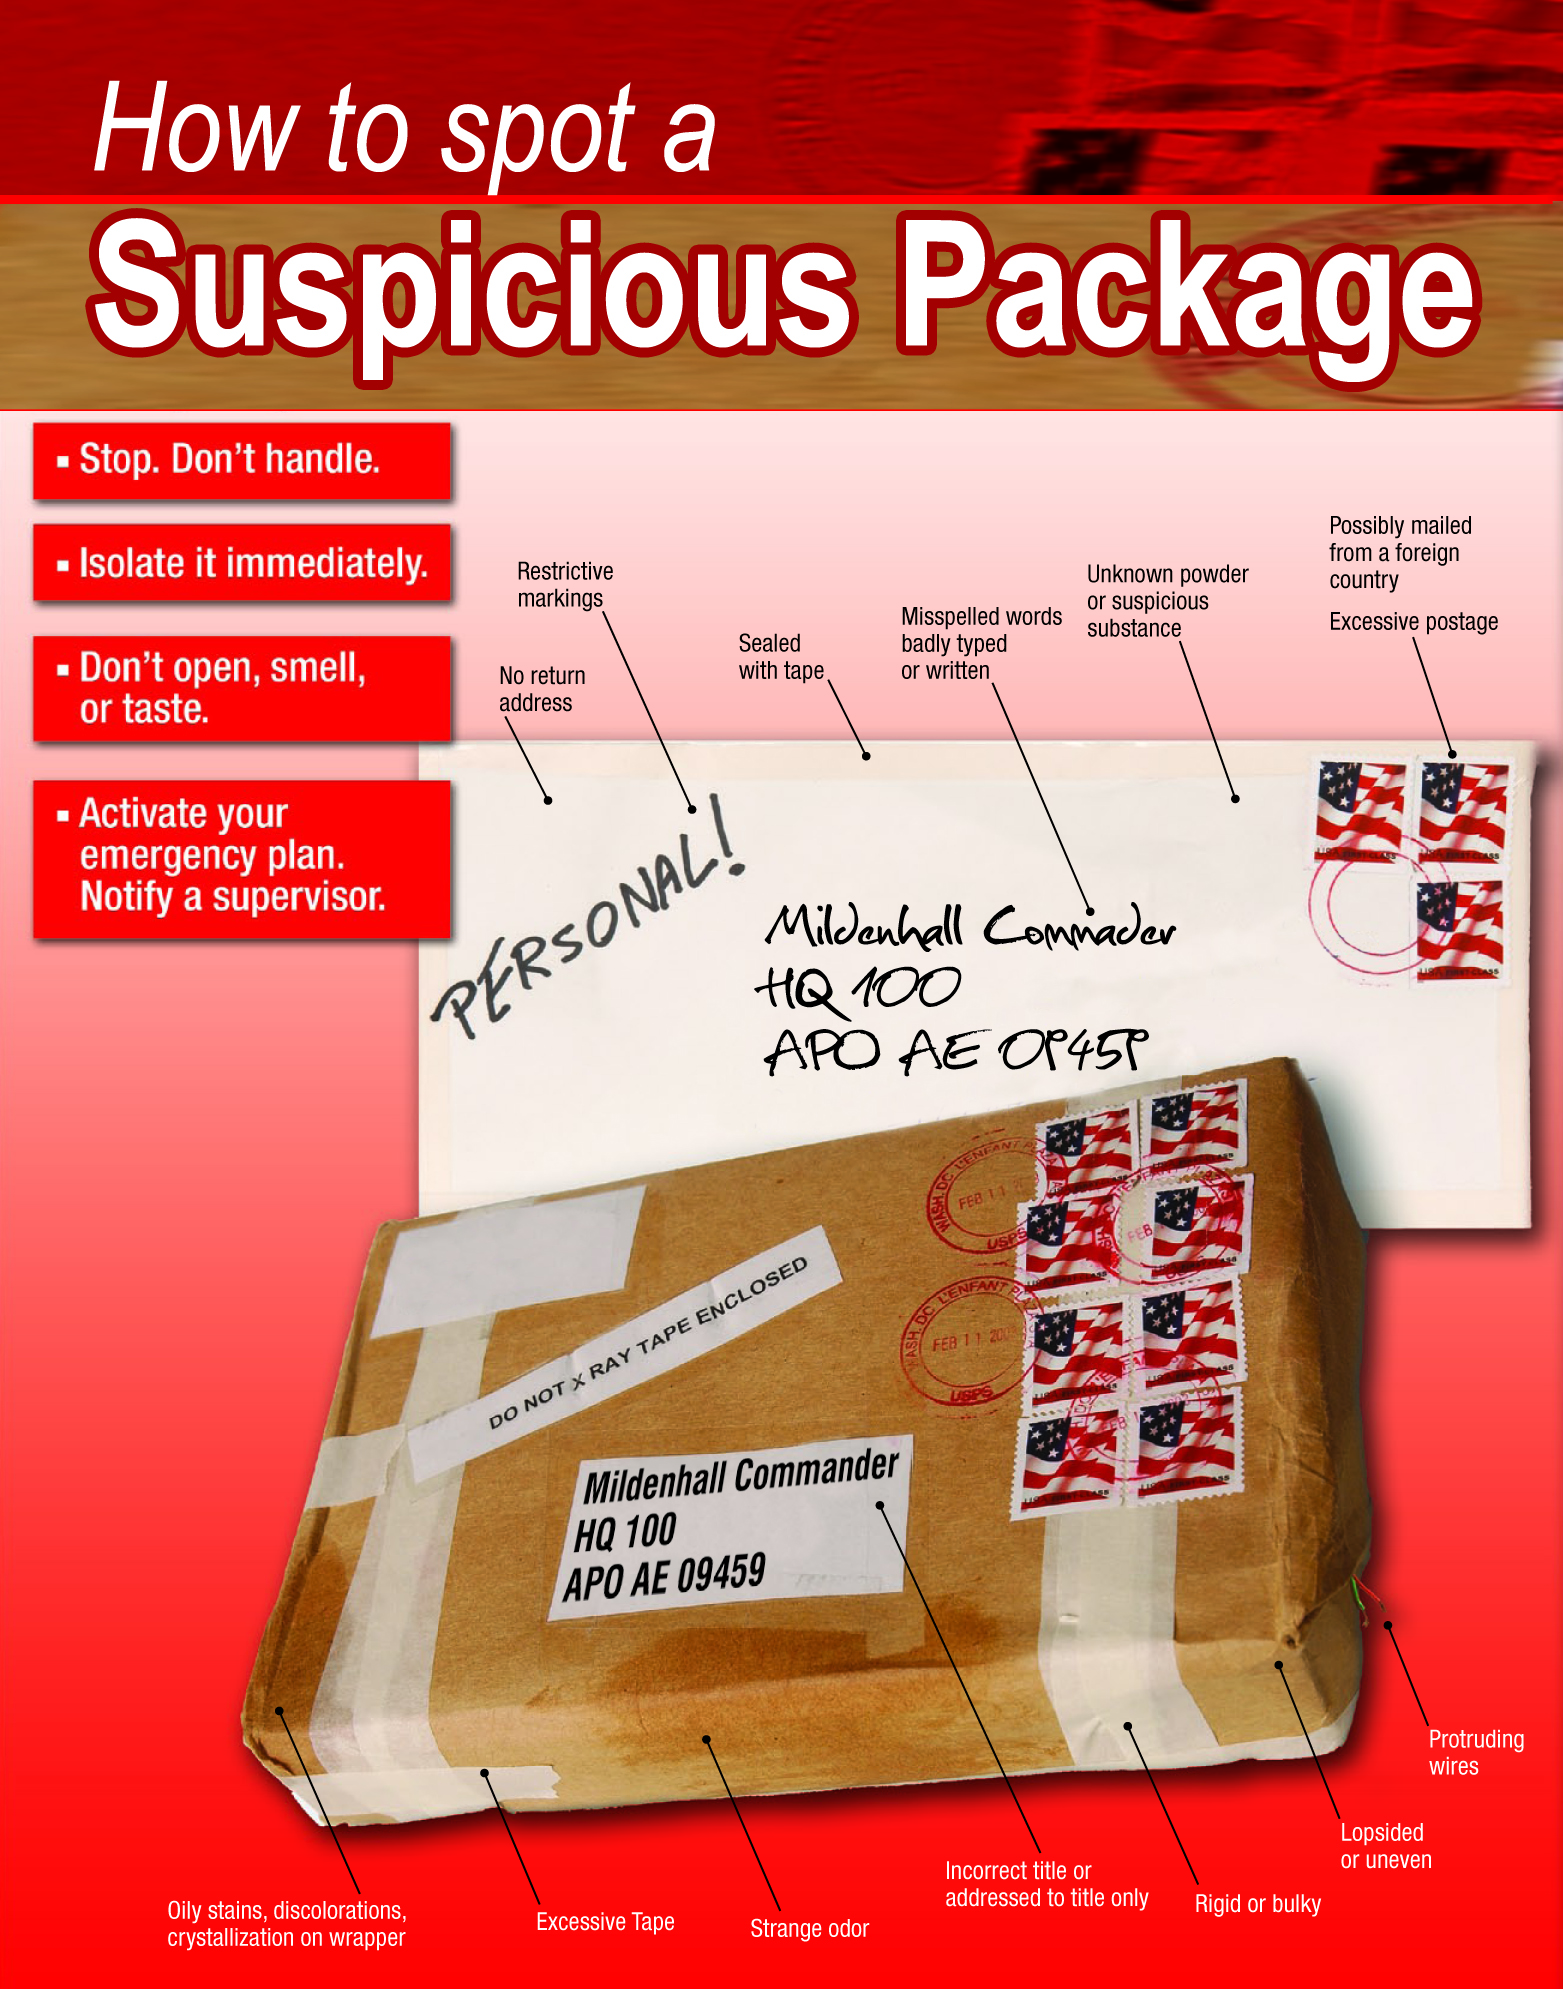 Handling package. Suspicious package. Suspicious email. Mission go wrapper. Game right wrapper.